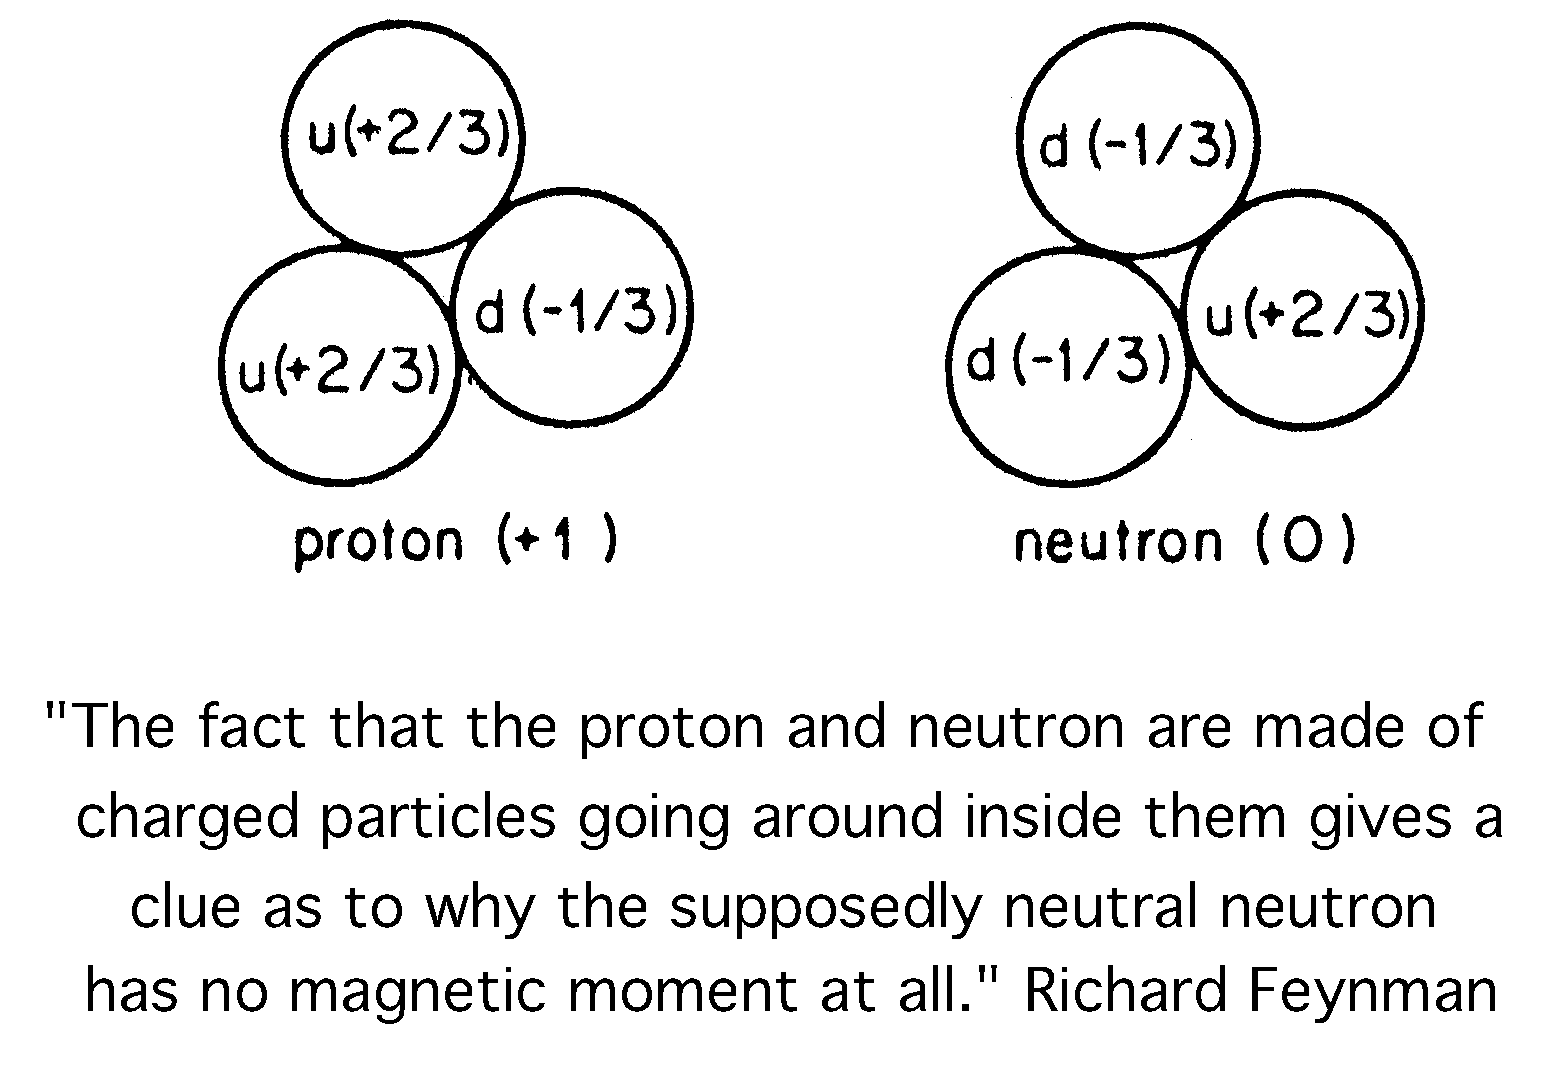 Feynman's Triplet Structures of the proton and neutron